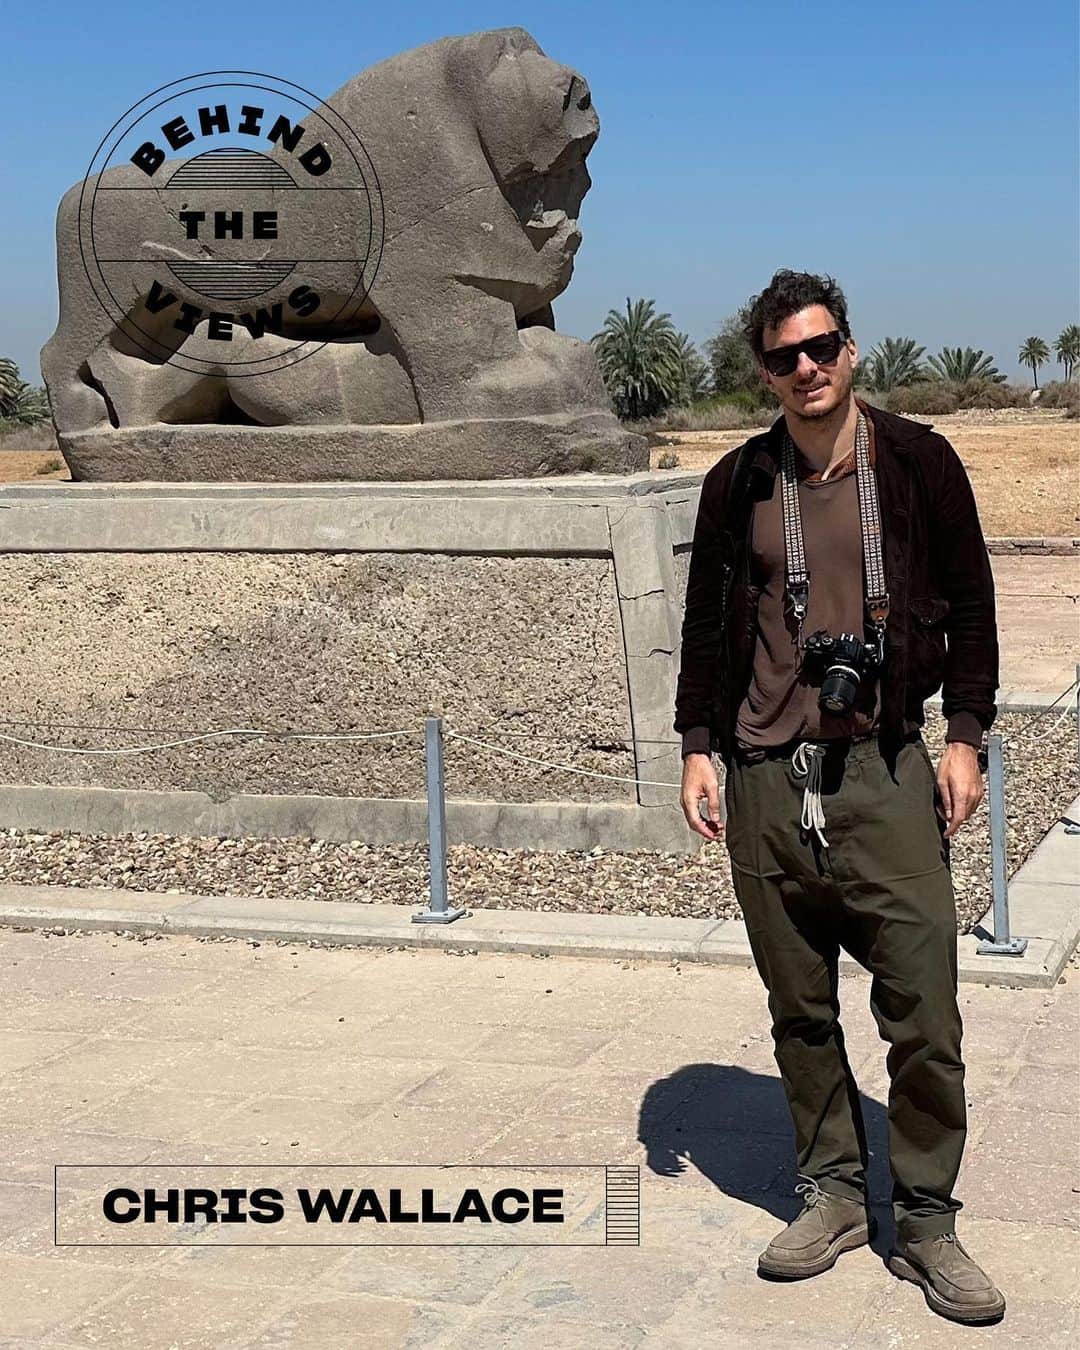 Travel + Leisureのインスタグラム：「This week on Behind the Views: Chris Wallace (@chriswallace4). Penning a biography about iconic photographer Peter Beard, Chris has always felt inspired by the art form. Following his completion of “Twentieth-century Man” in 2021, he decided to try his hand at taking photos professionally. “Maybe because not a lot of other people were traveling at the time, I was able to beg, borrow, and steal a few commissions for travel writing and photography stories. Somehow, I've been lucky enough to keep doing that in the years since,” he recently shared with T+L. . Chris’ approach to shooting on trips: “I spend a lot of time seeking out all sorts of references for tone and type — prepping, moodboarding, making shot lists, watching movies. But when I’m on the ground, I just get out of the way of instinct,” he says. “Surely, the homework informs what I respond to, but one of the reasons I was drawn to photography is because of how different it is from the overly-analytical practice of writing. Instead of sitting sedentary in my room, overdeveloping my critical faculties, photography is a more meditative process. It gives me permission to get up and run around, chasing pretty light and little moments that catch my attention.” . When asked about his advice for aspiring photographers, he says, “Do it, a lot. And look at, read, consume a lot of what has come before. Keep filling up your inspiration box and exercising the output muscle.” . In Chris’ go-to gear bag, you’ll find Nikon F100 and FM2 cameras, and zoom lenses. . All photos by @chriswallace4」